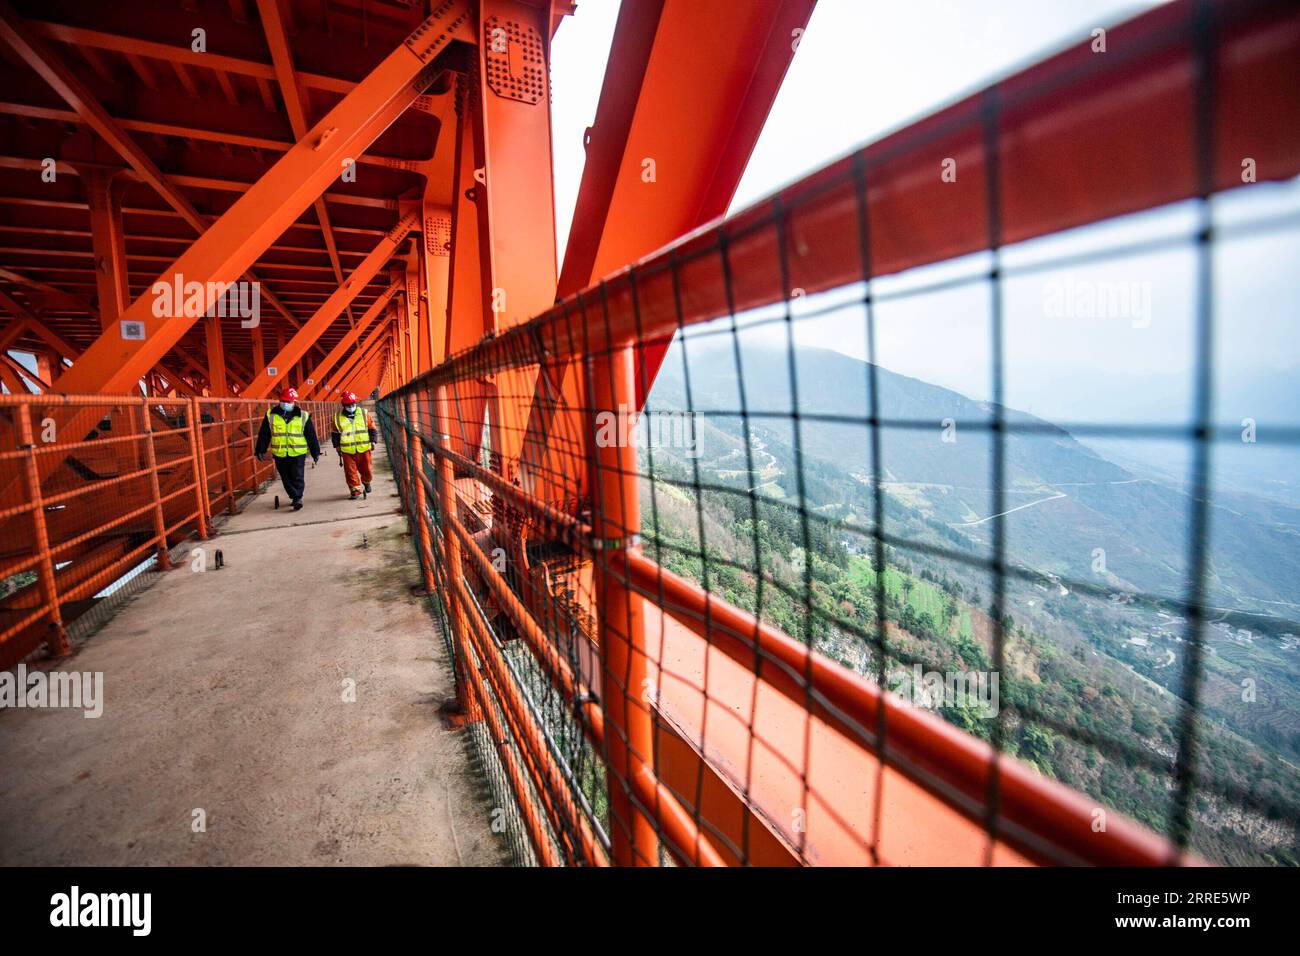 220130 -- LIUPANSHUI, Jan. 30, 2022 -- Maintenance workers examine the interior of the Beipanjiang Bridge in southwest China s Guizhou Province, Jan. 29, 2022. Sitting over 565.4 meters above a valley, the Beipanjiang Bridge has been certified as the world s highest bridge by the Guinness World Records. Spanning 1,341.4 meters, the bridge links Duge Township of Liupanshui in southwest China s Guizhou with Puli Township of Xuanwei in southwest China s Yunnan Province.  CHINA-GUIZHOU-LIUPANSHUI-BEIPANJIANG BRIDGE-MAINTENANCECN TaoxLiang PUBLICATIONxNOTxINxCHN Stock Photo